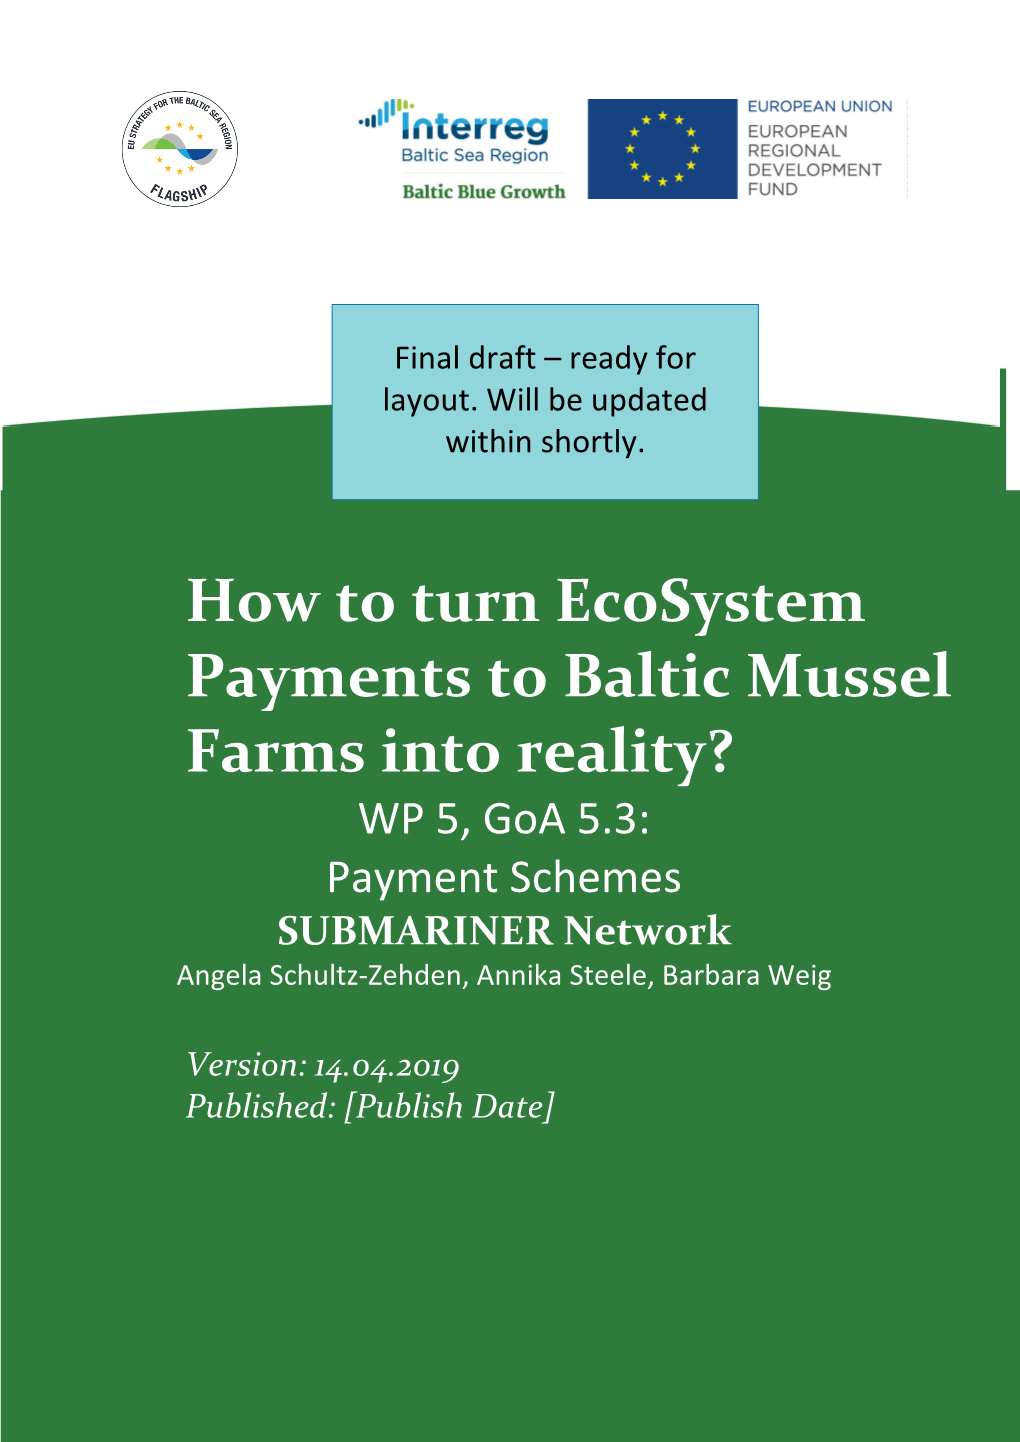 How to Turn Ecosystem Payments to Baltic Mussel Farms Into Reality? WP 5, Goa 5.3